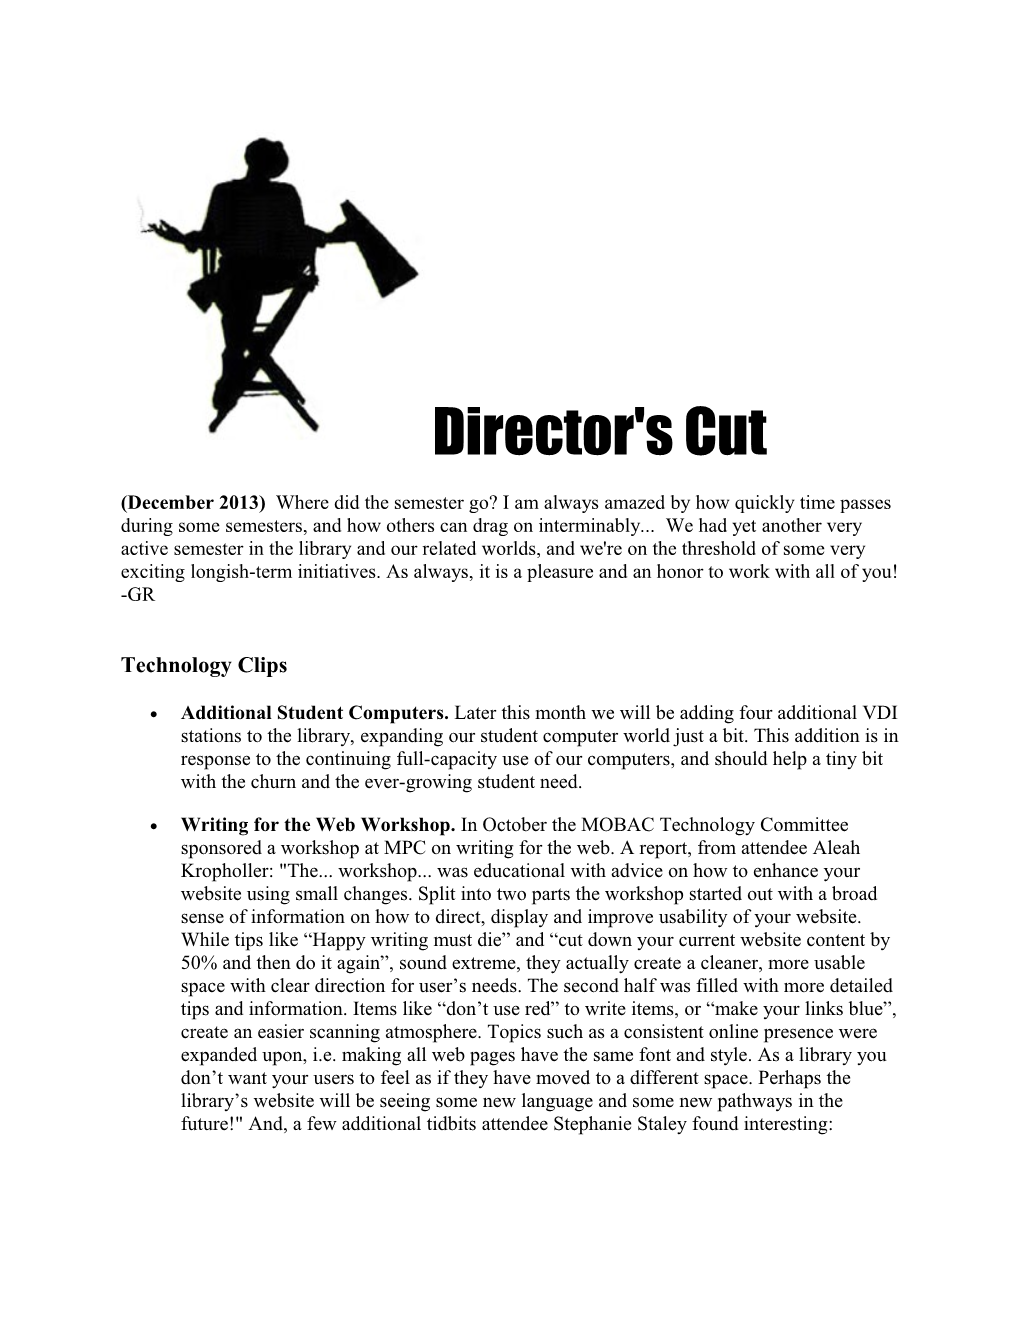 Director's Cut (December 2013)Where Did the Semester Go? I Am Always Amazed by How Quickly